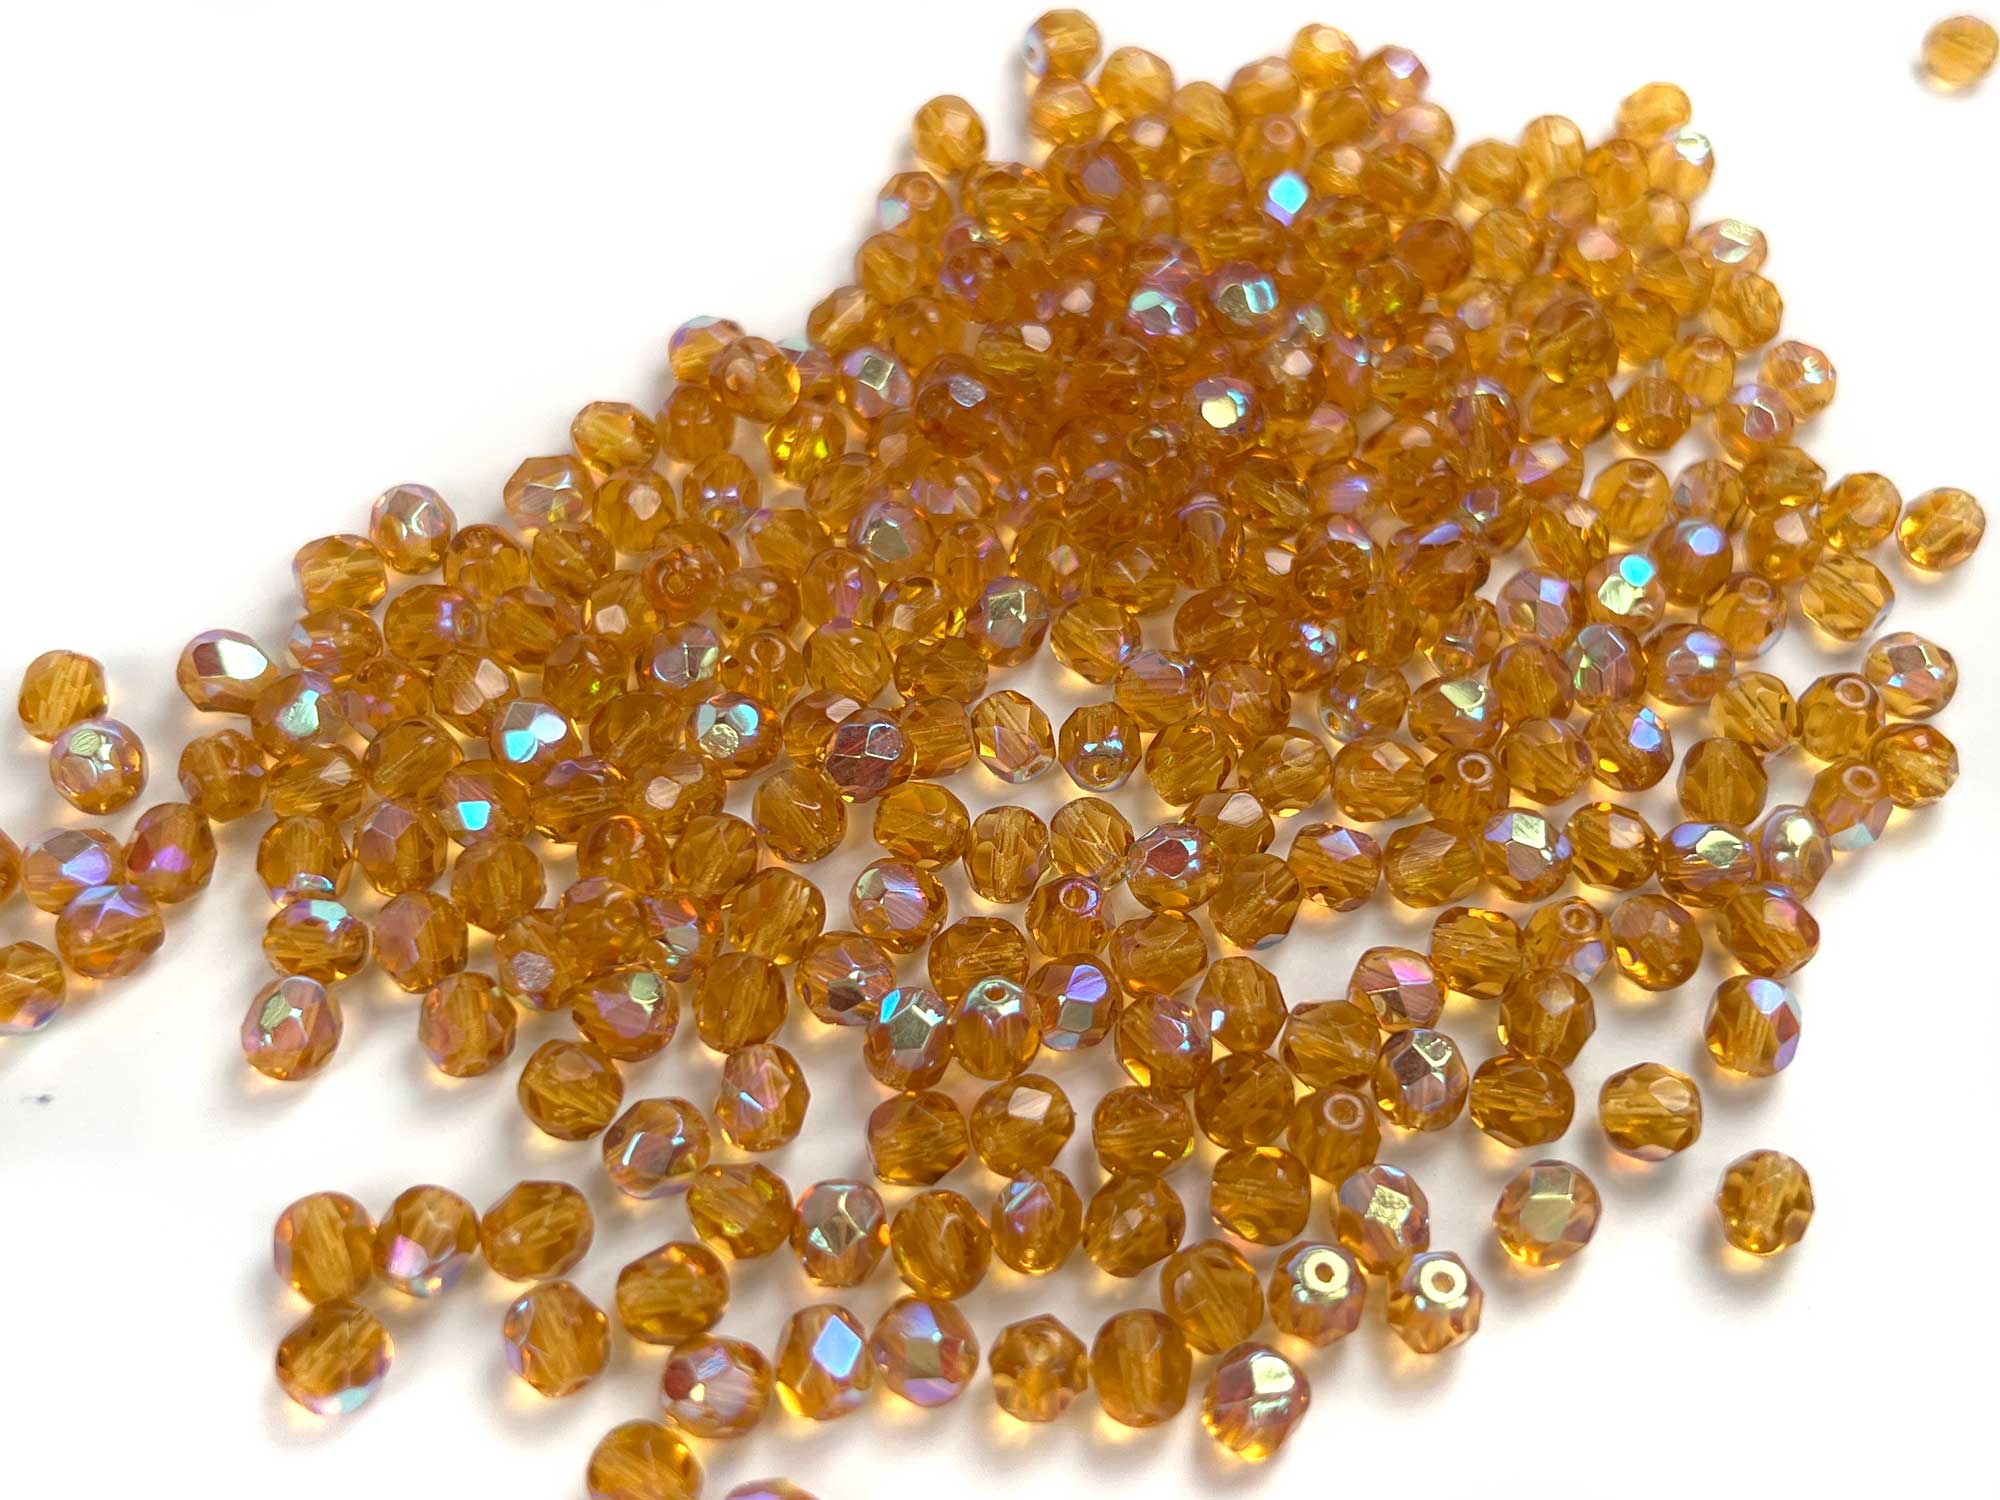 Topaz AB coated, loose Czech Fire Polished Round Faceted Glass Beads, golden brown with Aurora Boreale, 3mm, 4mm, 6mm